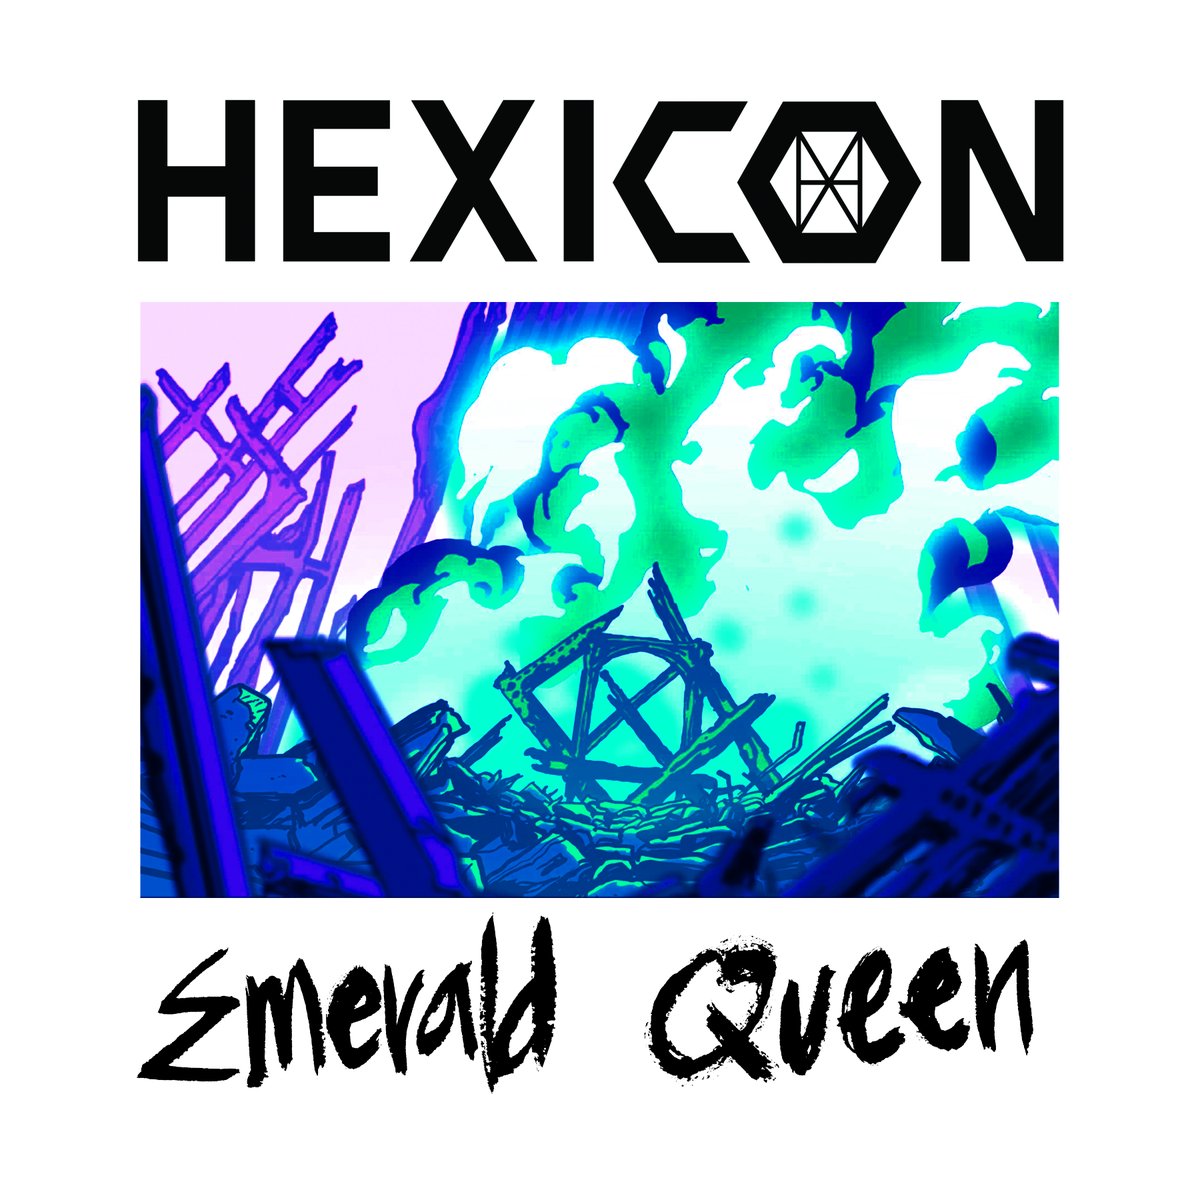 Hey guys, been a while 🤘 just dropping by to say there's a new HEXICON single and music video 'Emerald Queen' coming 3/17! Sneak an early listen at hexiconmetal.bandcamp.com for Bandcamp Friday!